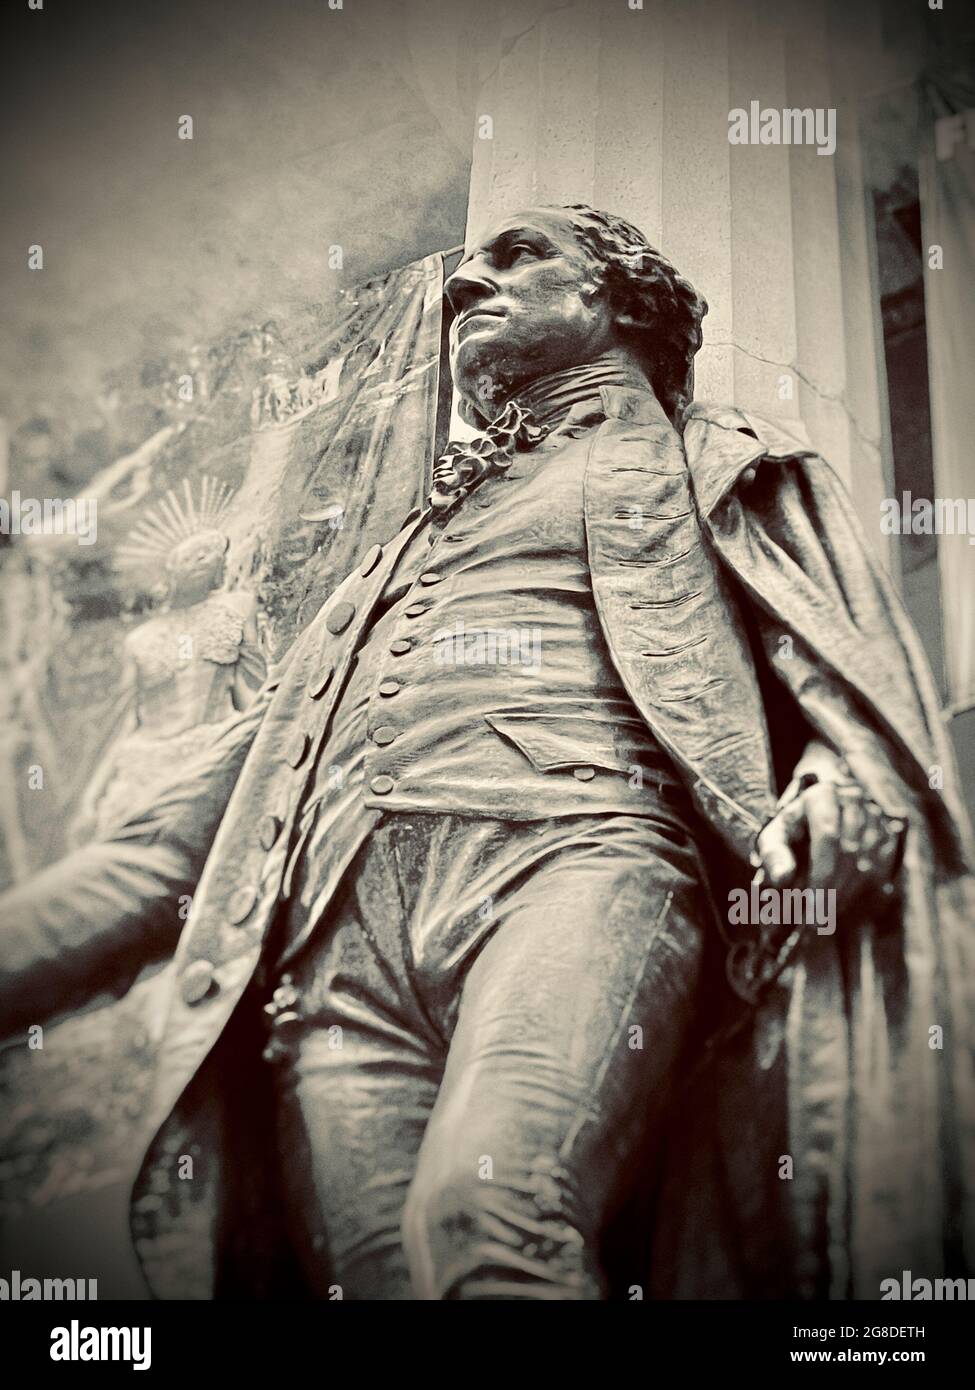 Statue of George Washington at Federal Hall in lower Manhattan’s Financial District. Stock Photo